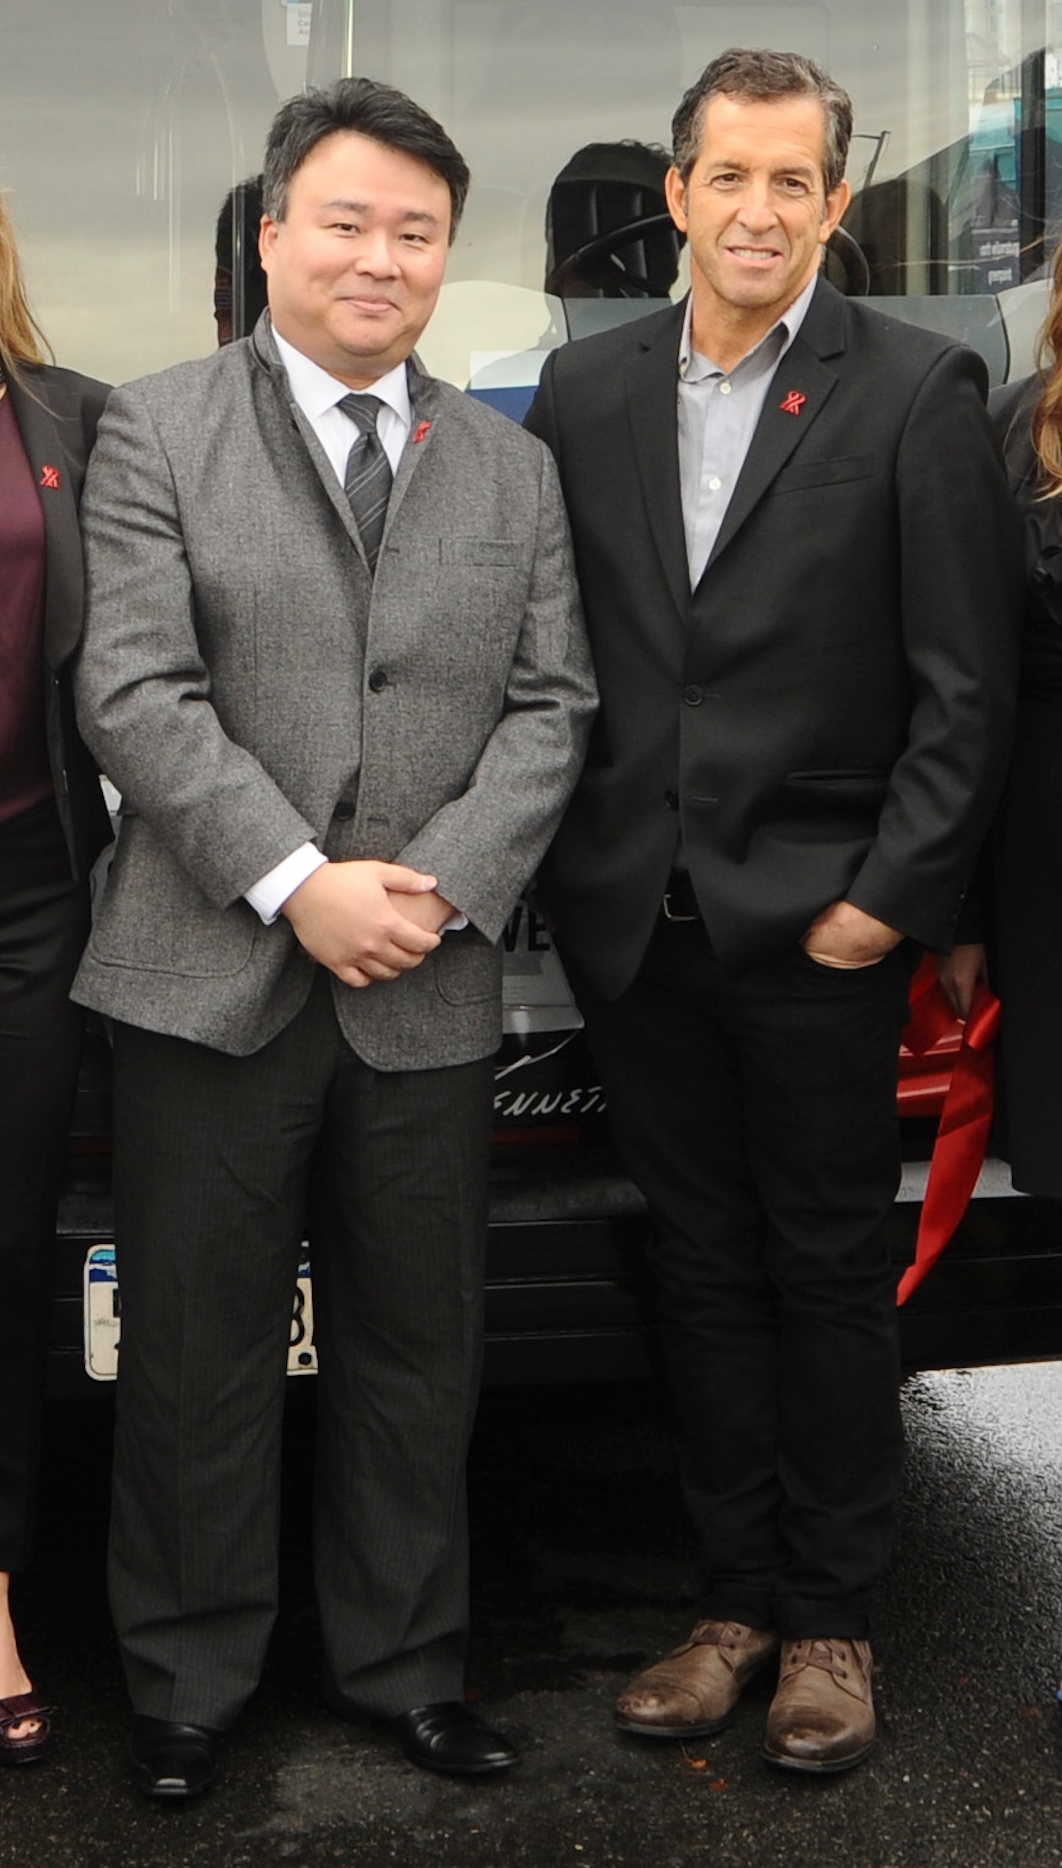 David W. Chien poses with Kenneth Cole at his Ride of Fame Induction Ceremony (November 18th, 2011).